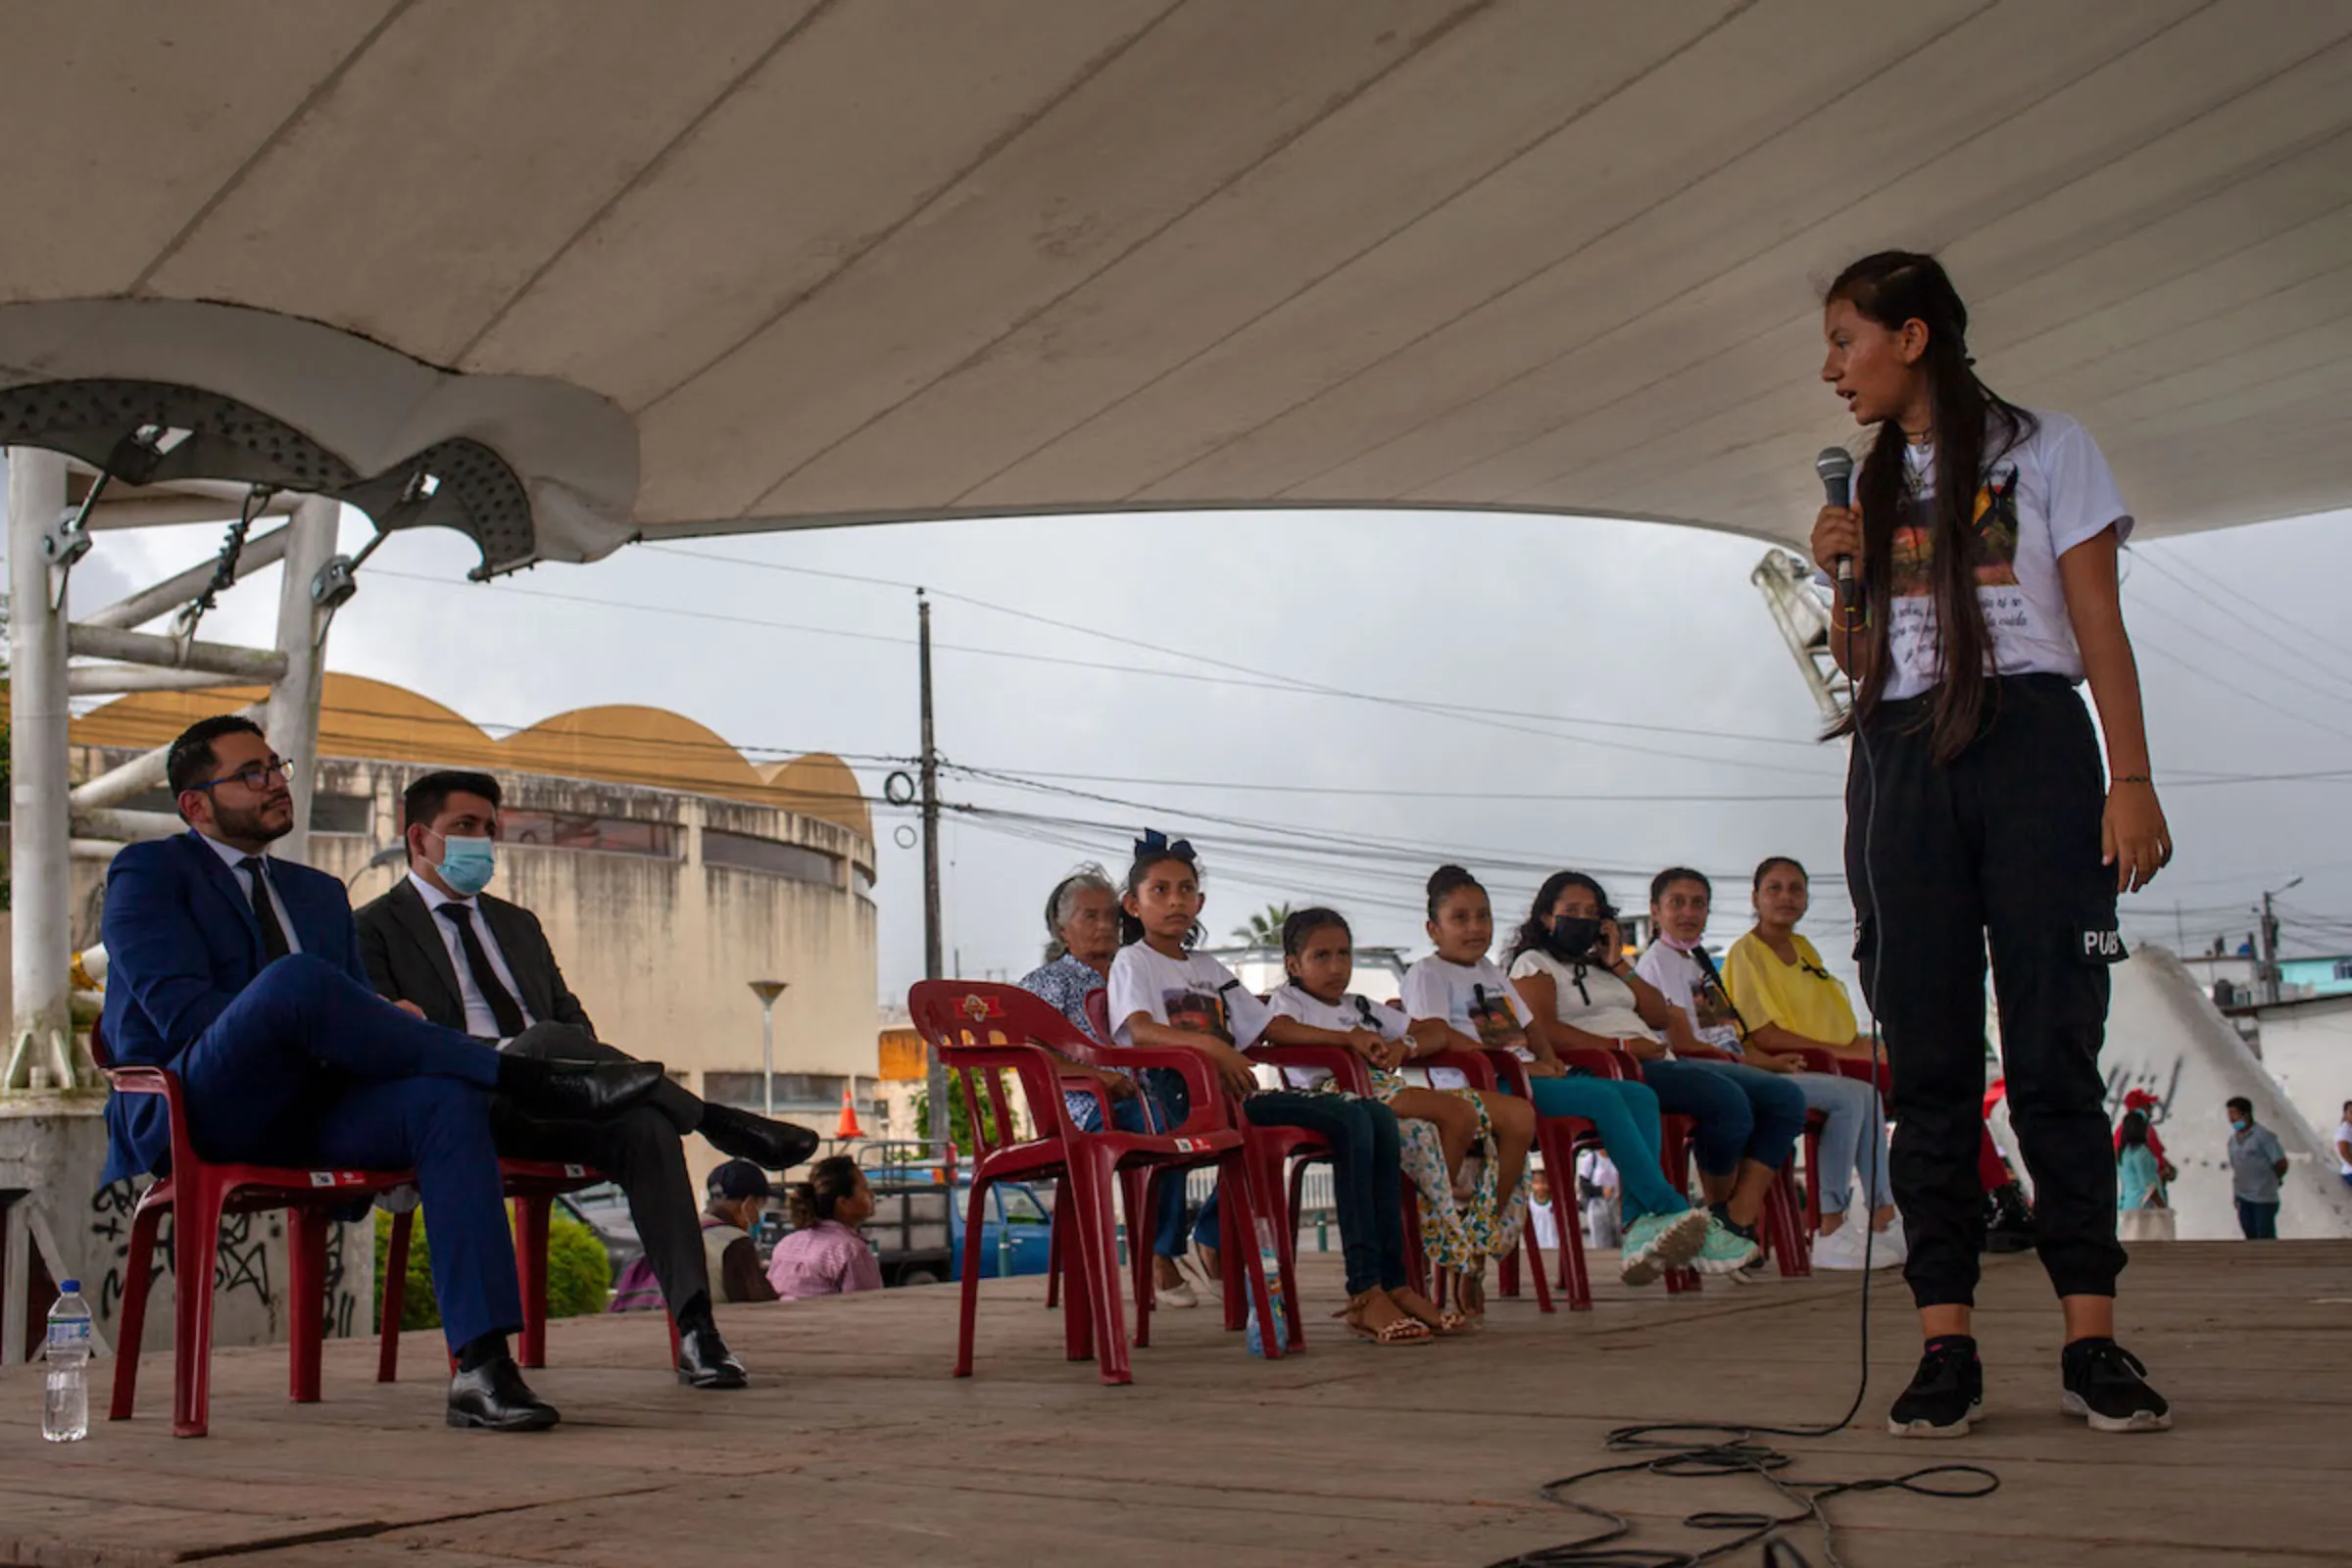 11-year-old Ecuadorean Leonela Moncayo addresses government officials during an event in when they gave a public apology to Moncayo and other 8 plaintiffs demanding gas flares be removed. Lago Agrio, Ecuador. April 20, 2022. Thomson Reuters Foundation/Fabio Cuttica